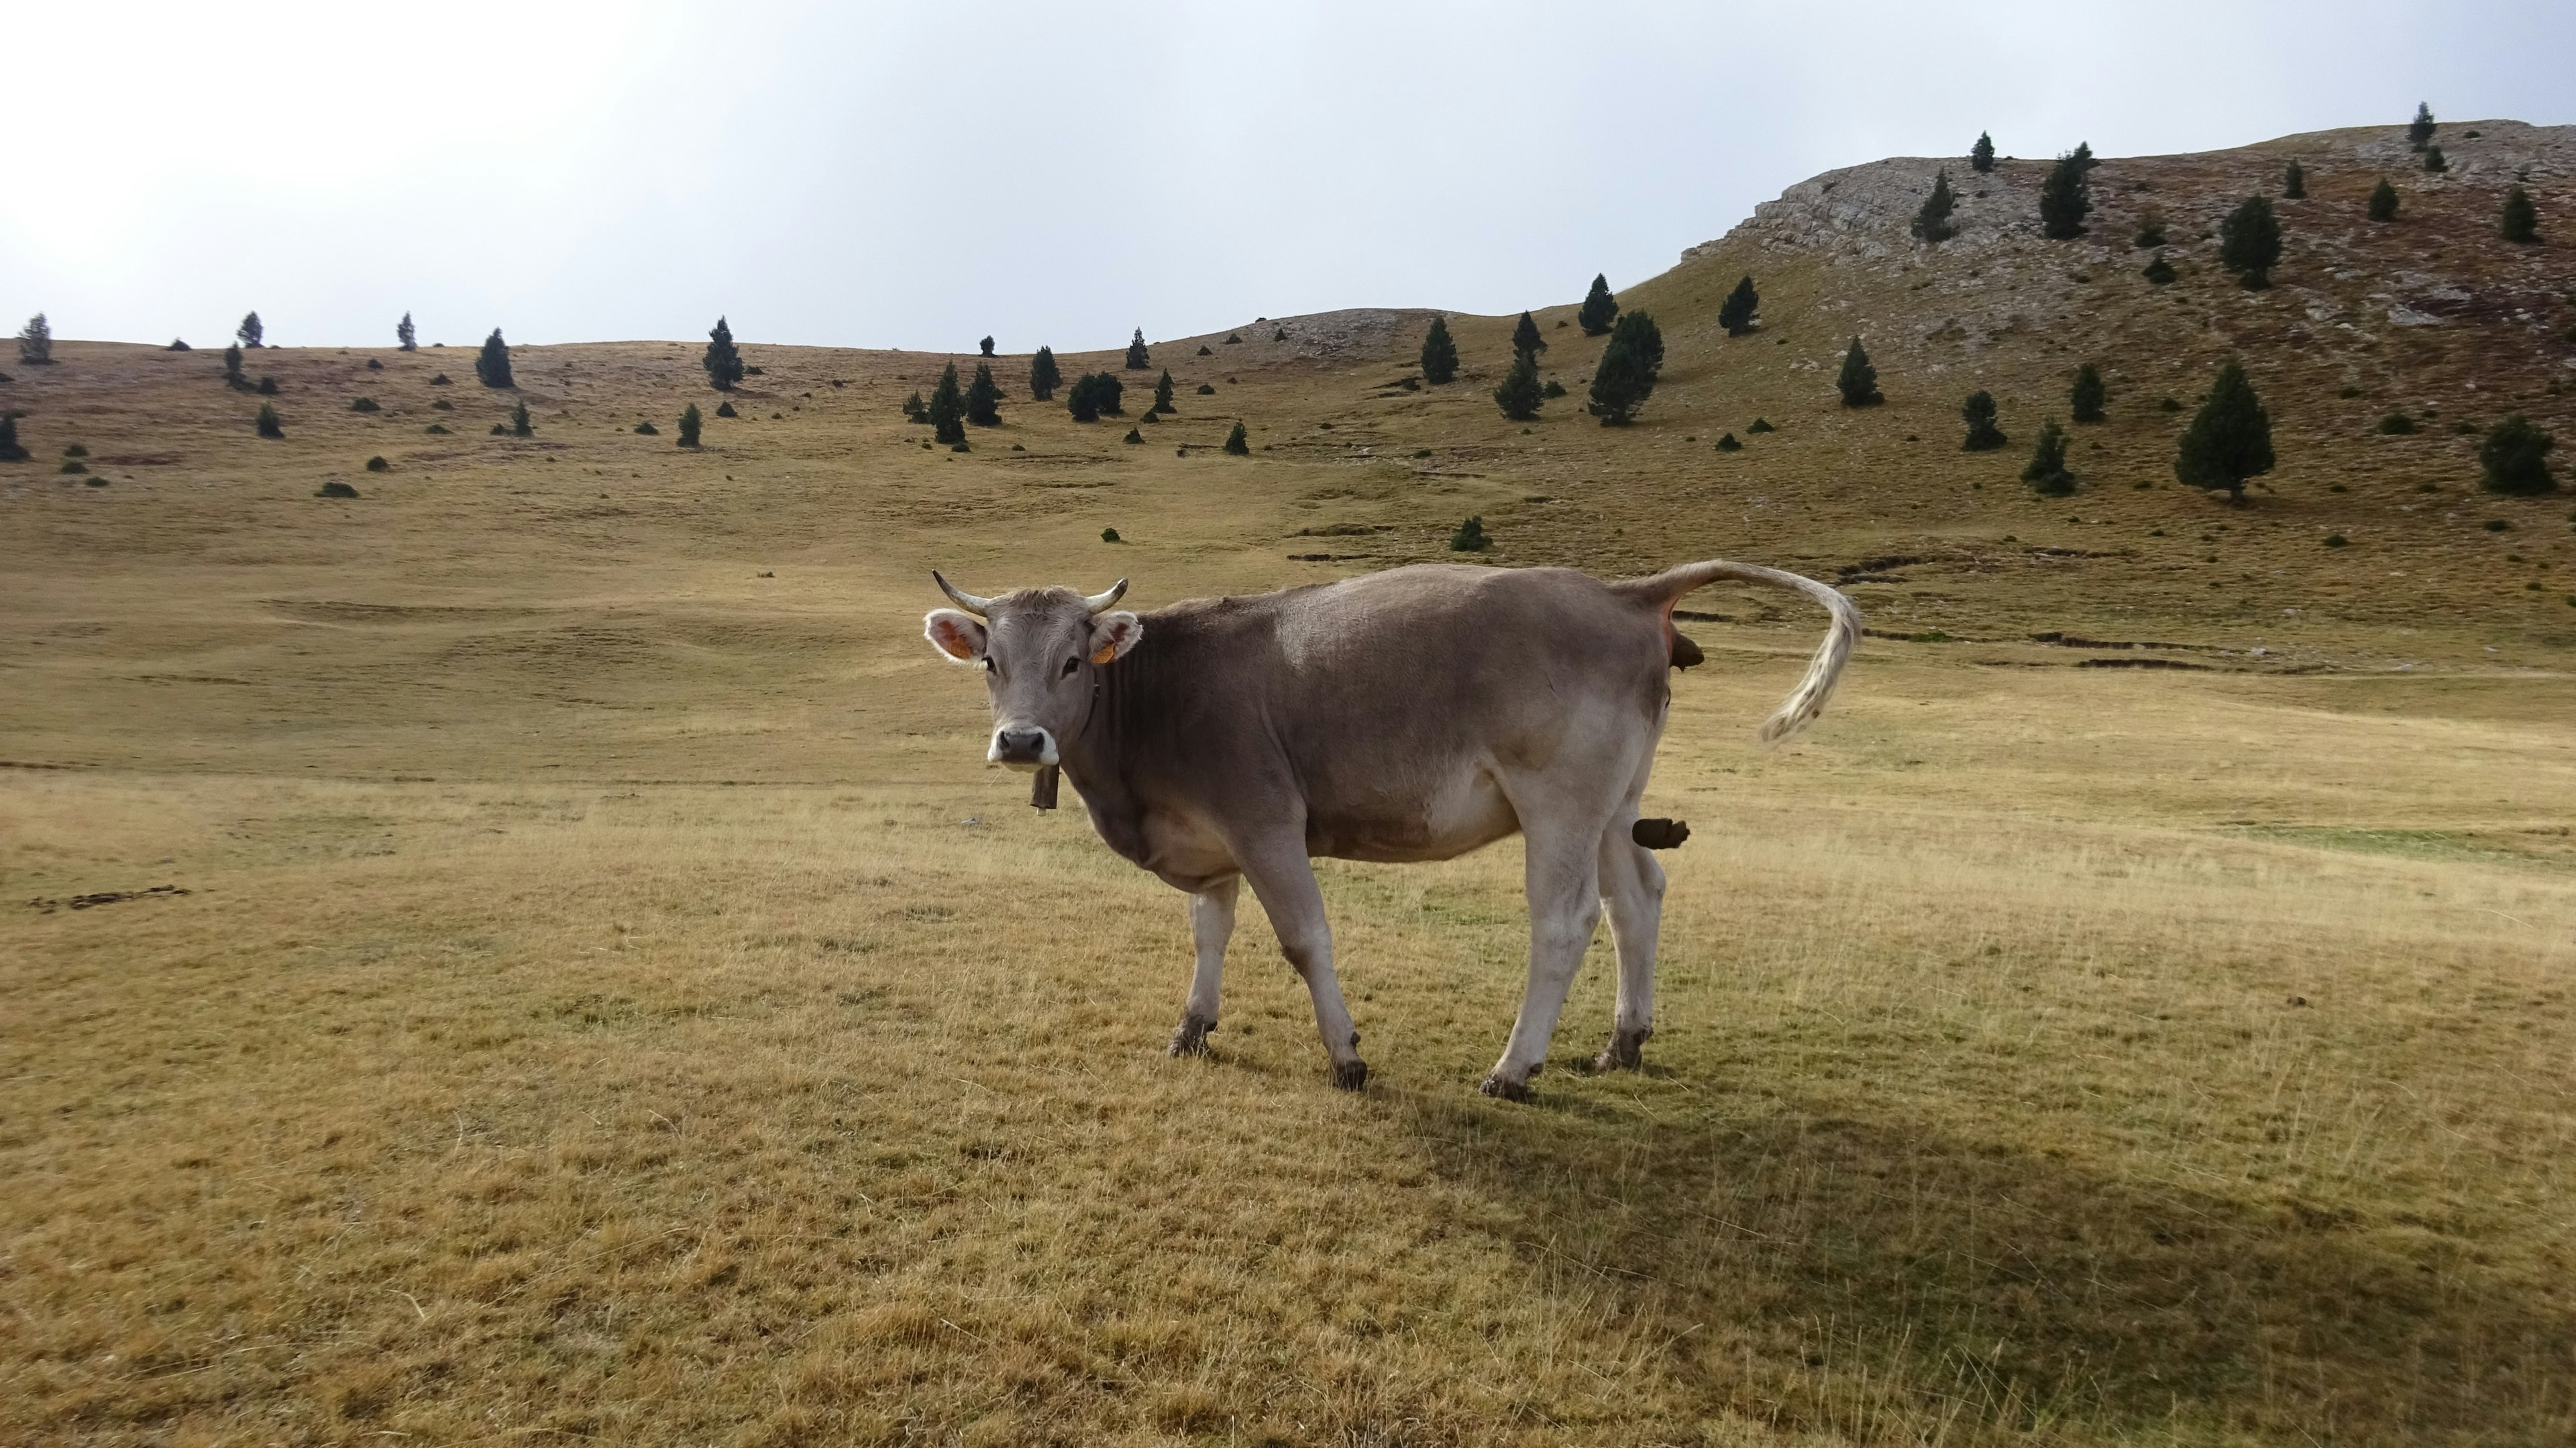 A cow, standing in a field, pooping